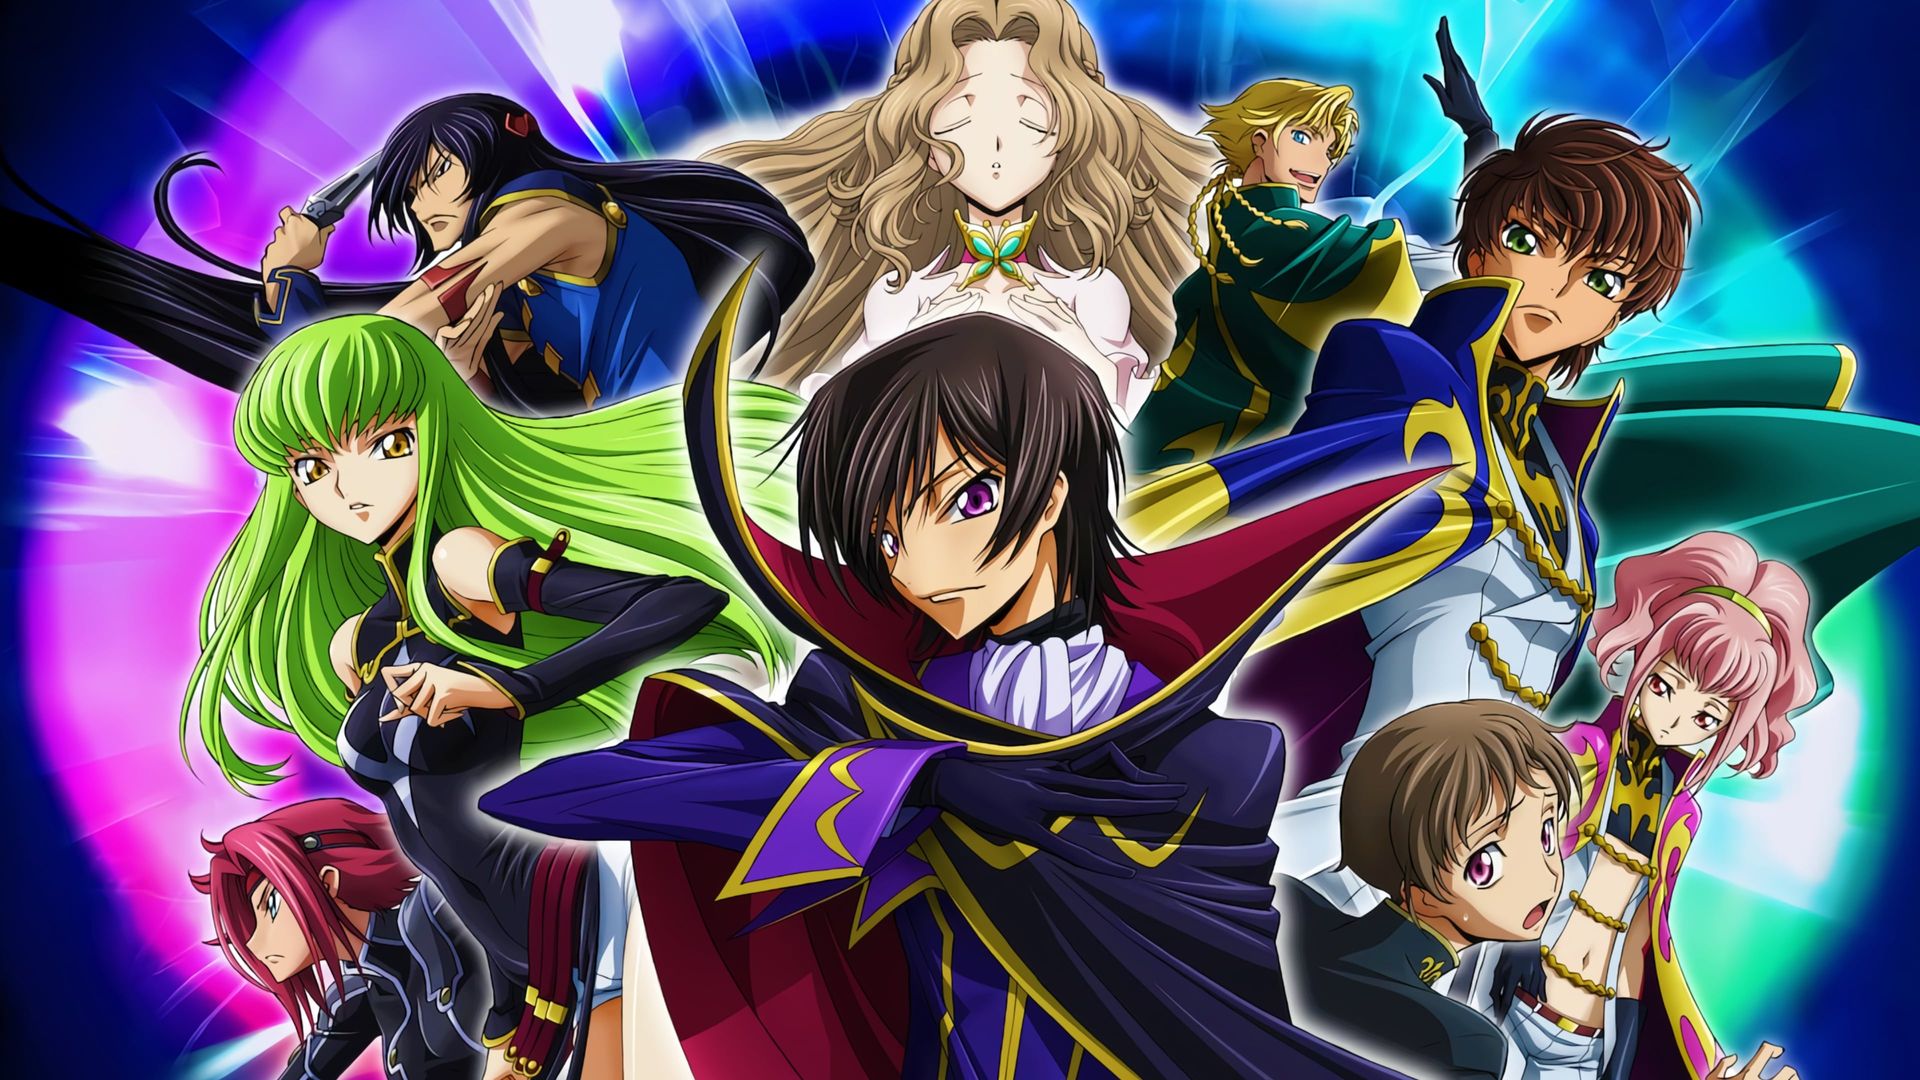 2nd Code Geass Anime Compilation Film Reveals New Visual, Song Performers -  News - Anime News Network